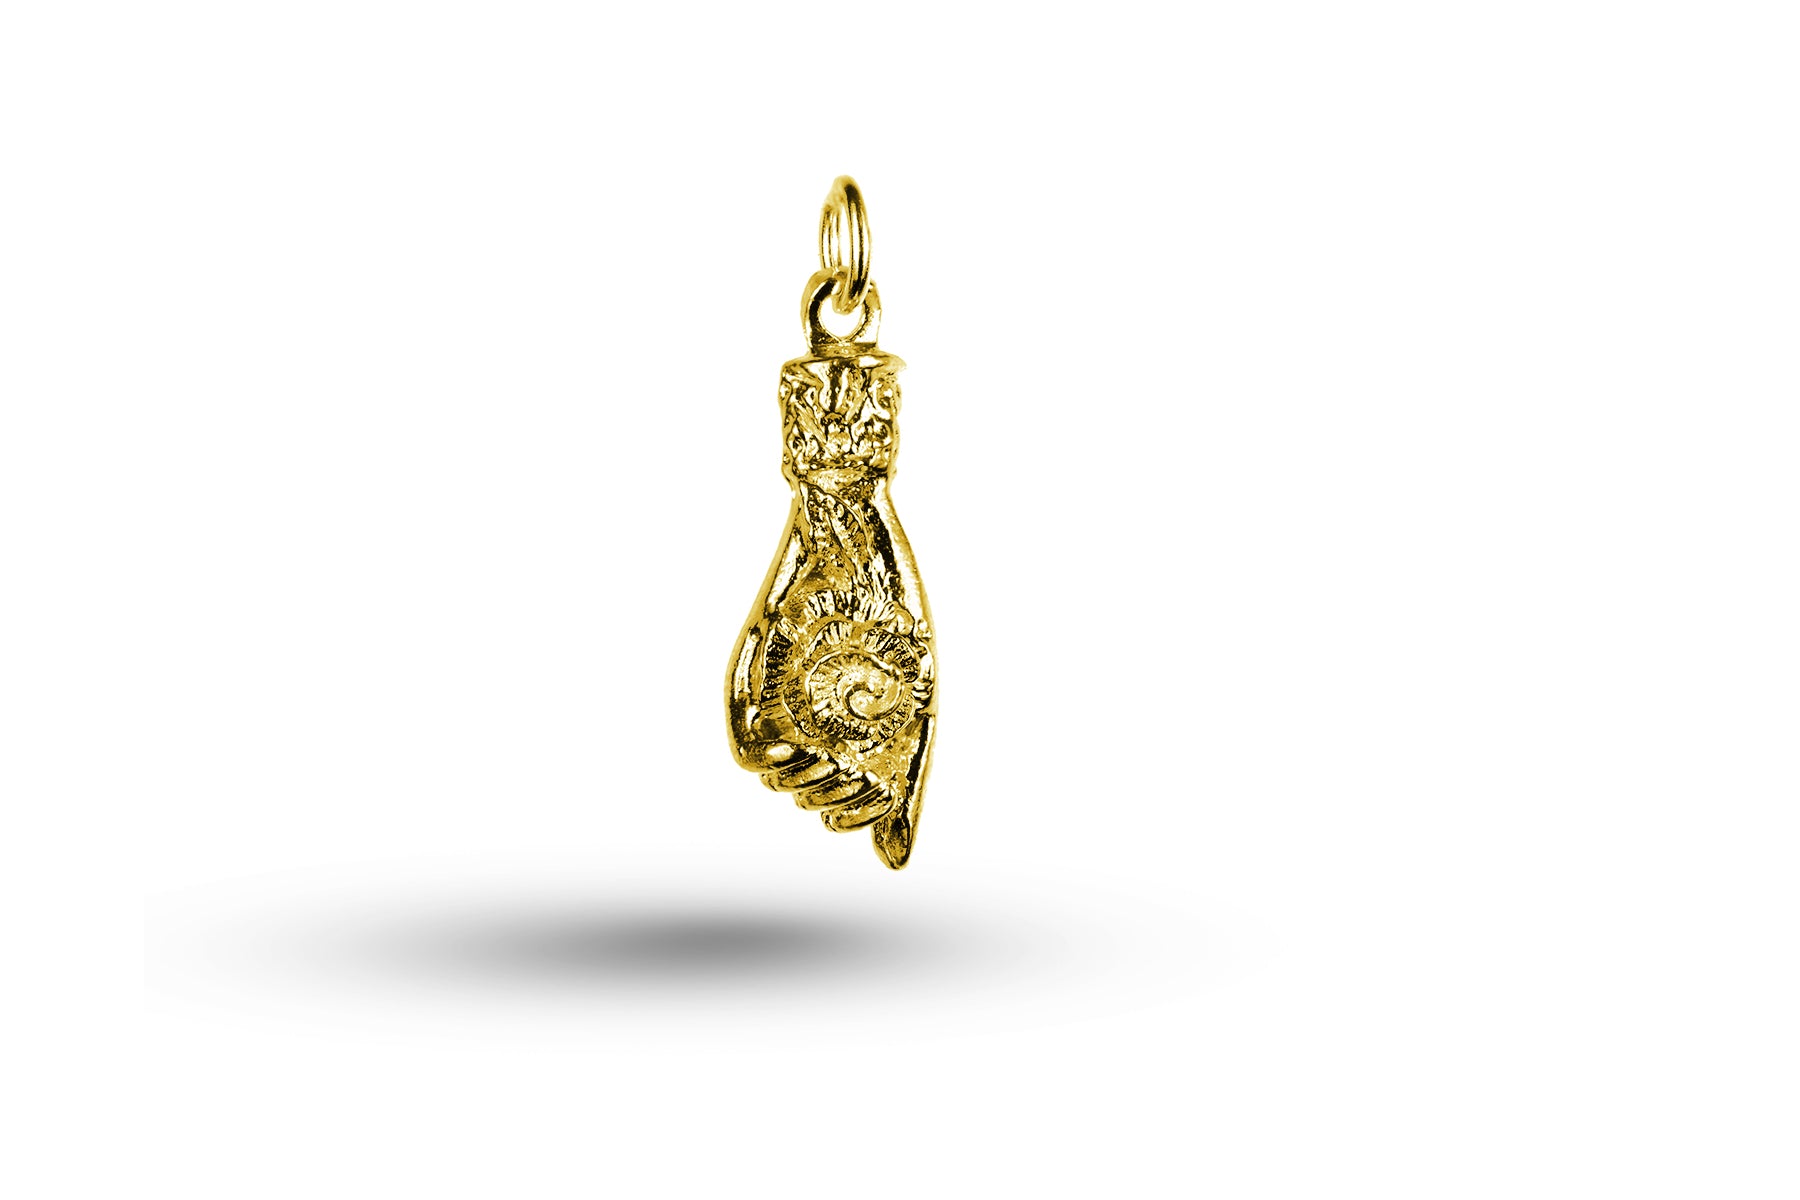 Yellow gold Hand Holding Rose charm.